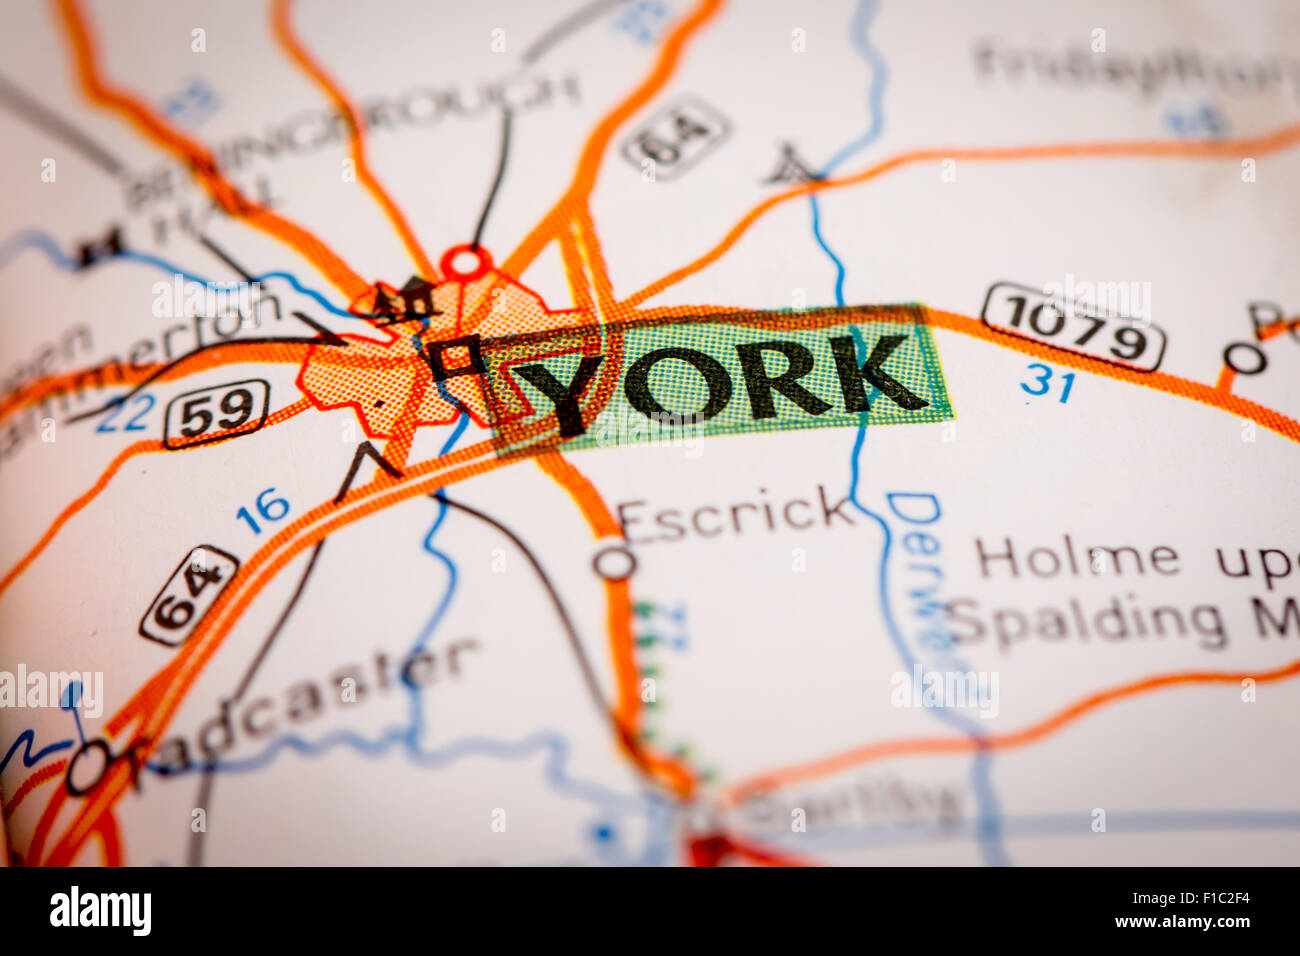 Map Photography: York City on a Road Map Stock Photo